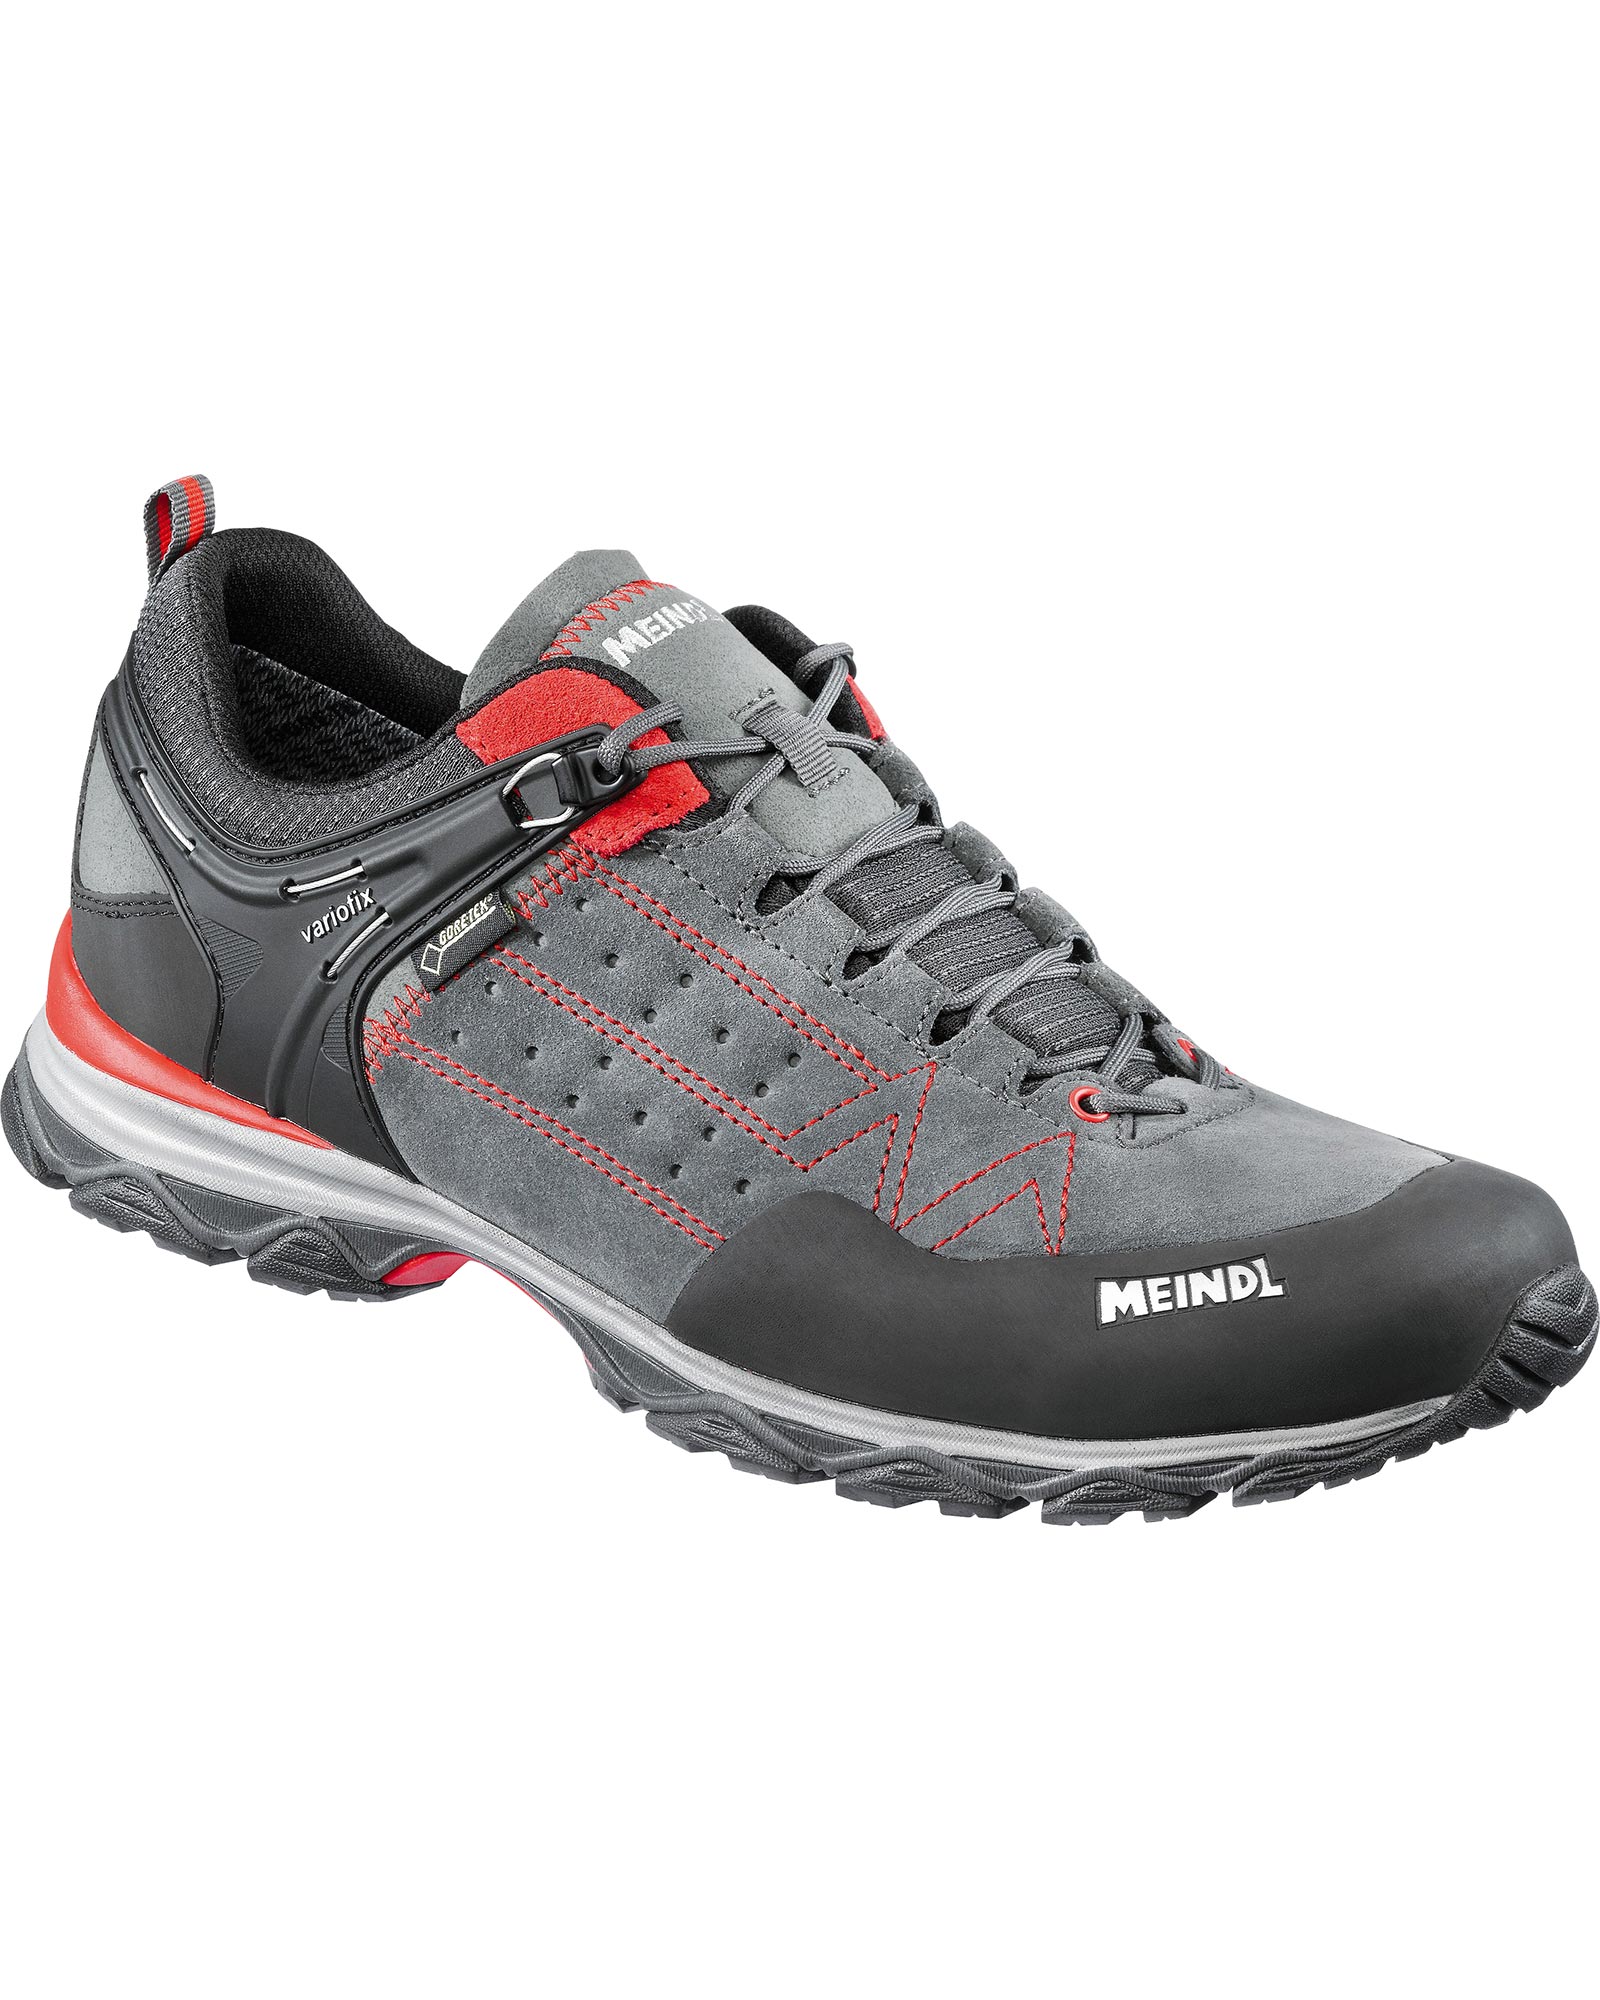 Meindl Ontario GORE TEX Men’s Shoes - Red/Anthracite UK 11.5